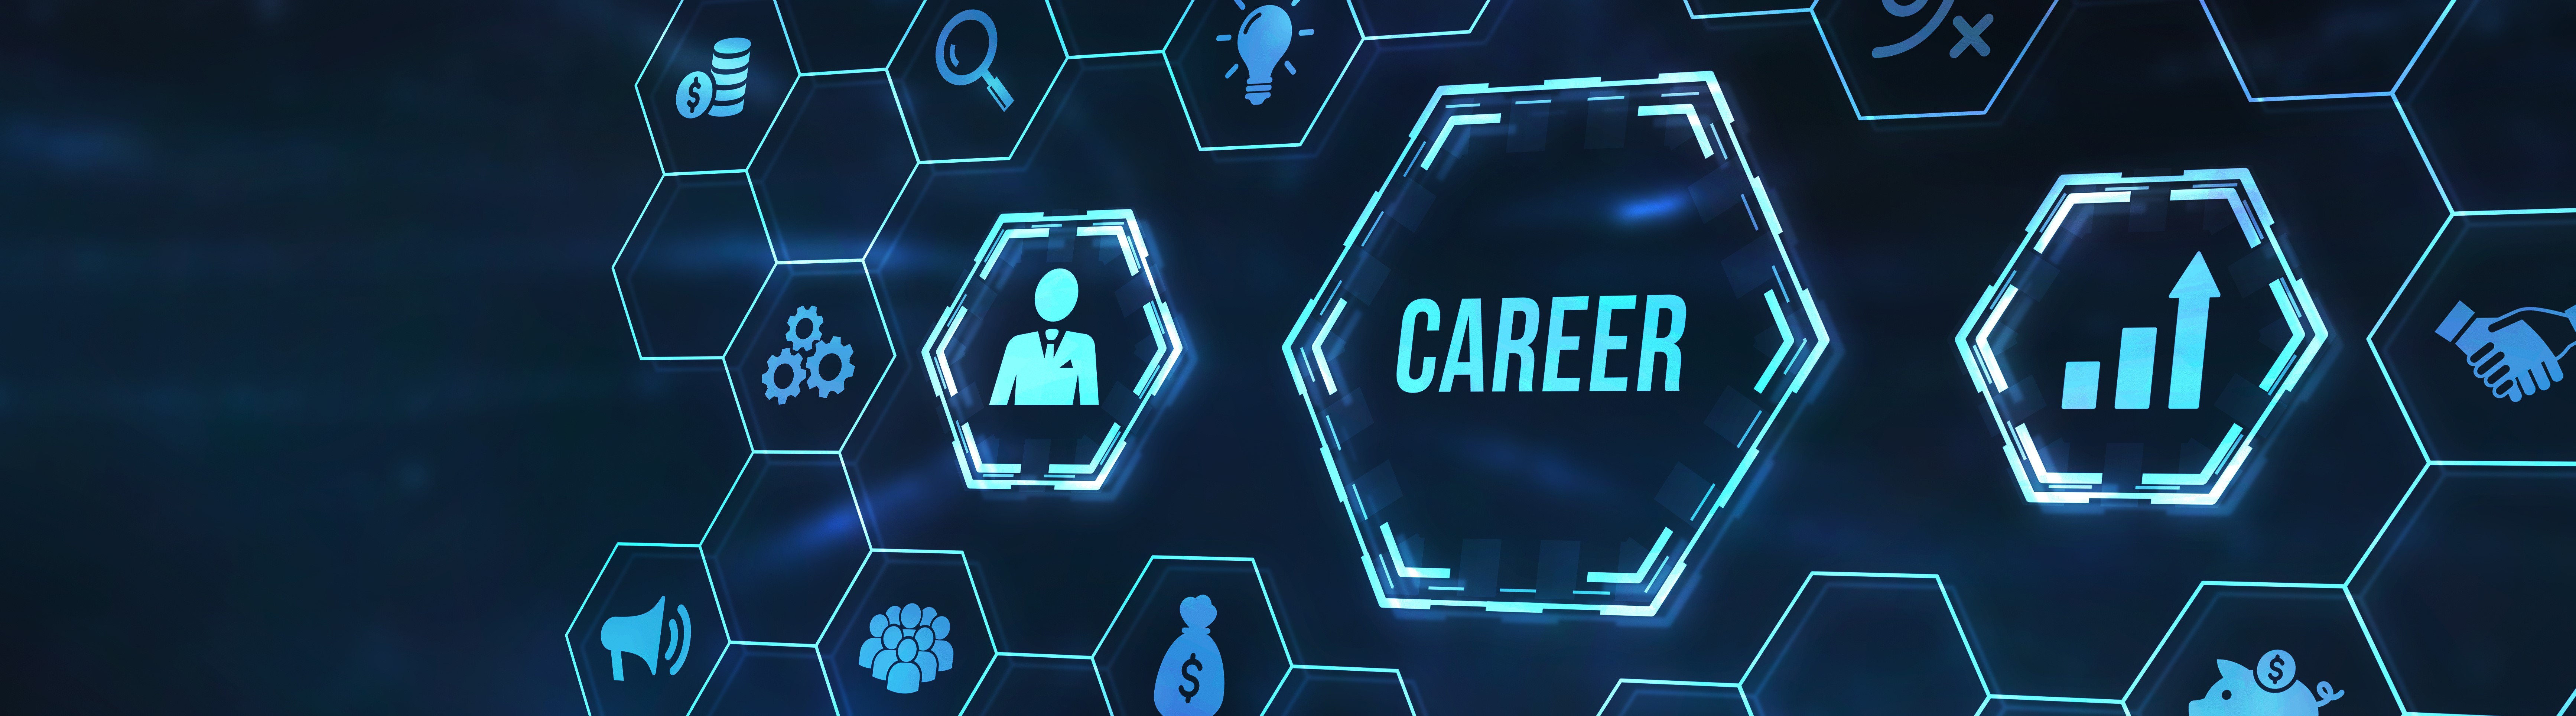 Career graphic